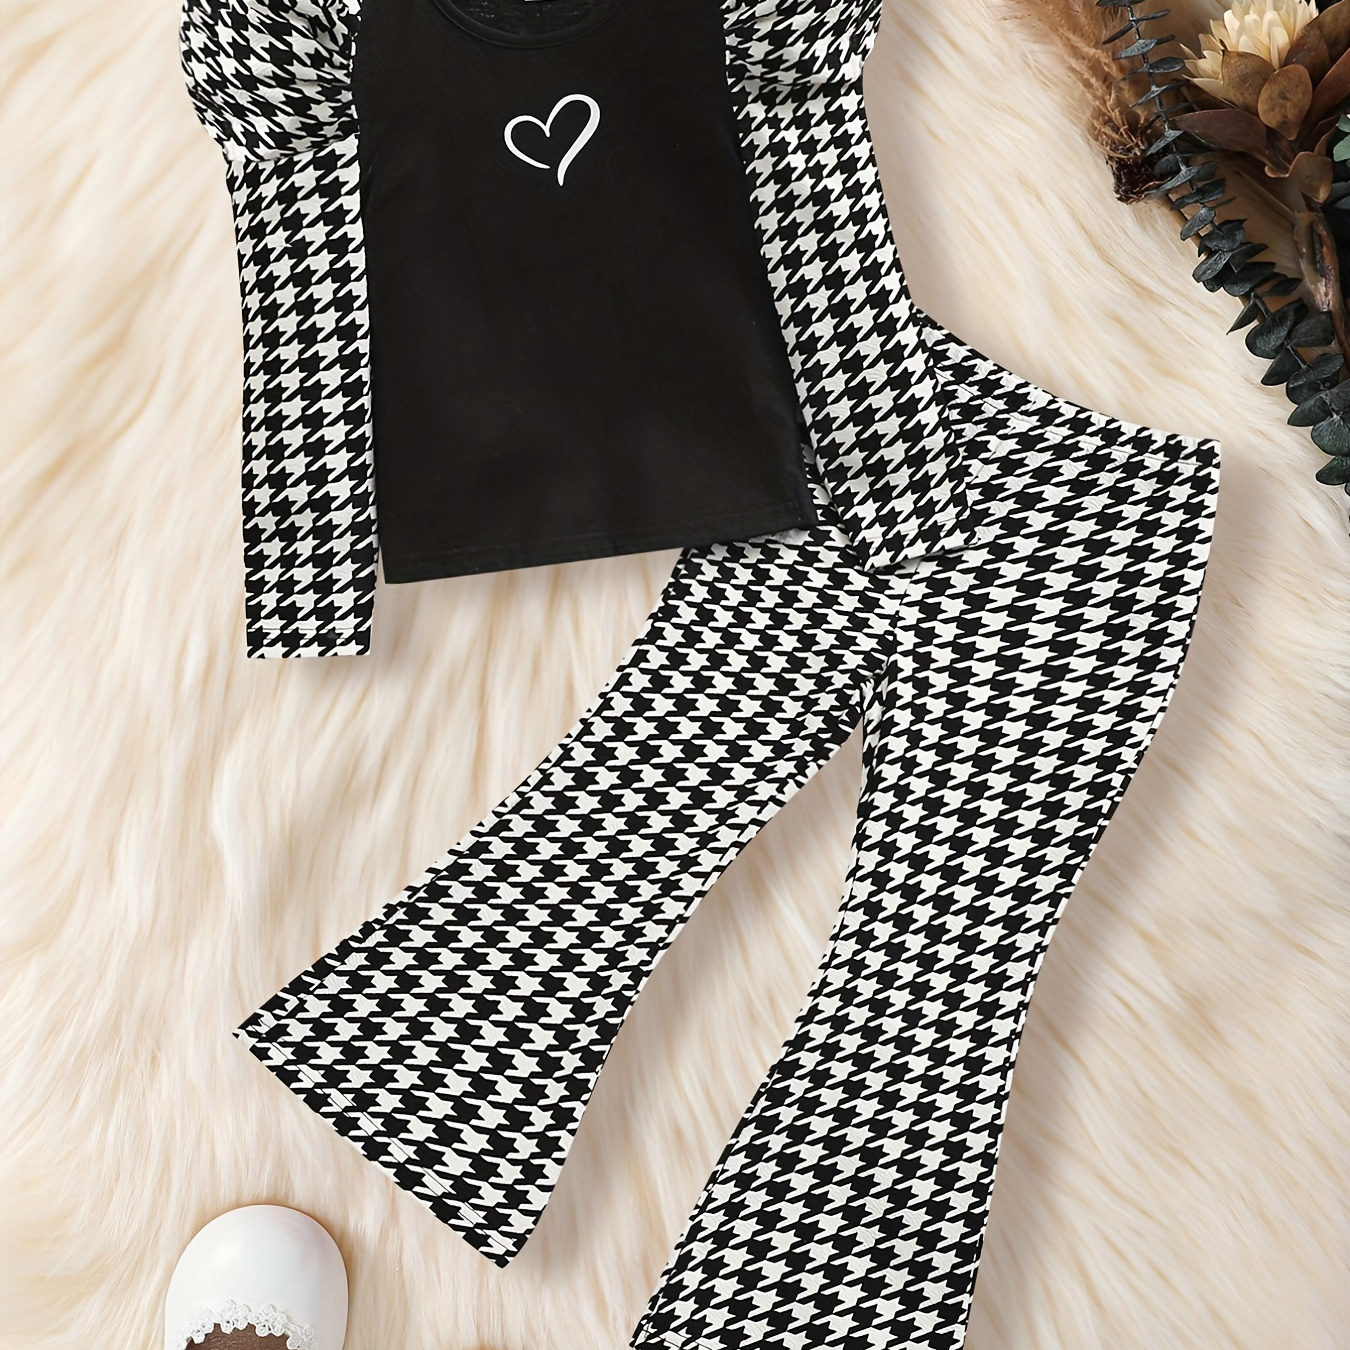 

Girl's 2pcs Long Sleeve Top & Flared Pants Set, Heart Print Houndstooth Pattern Casual Outfits, Kids Clothes For Spring Fall